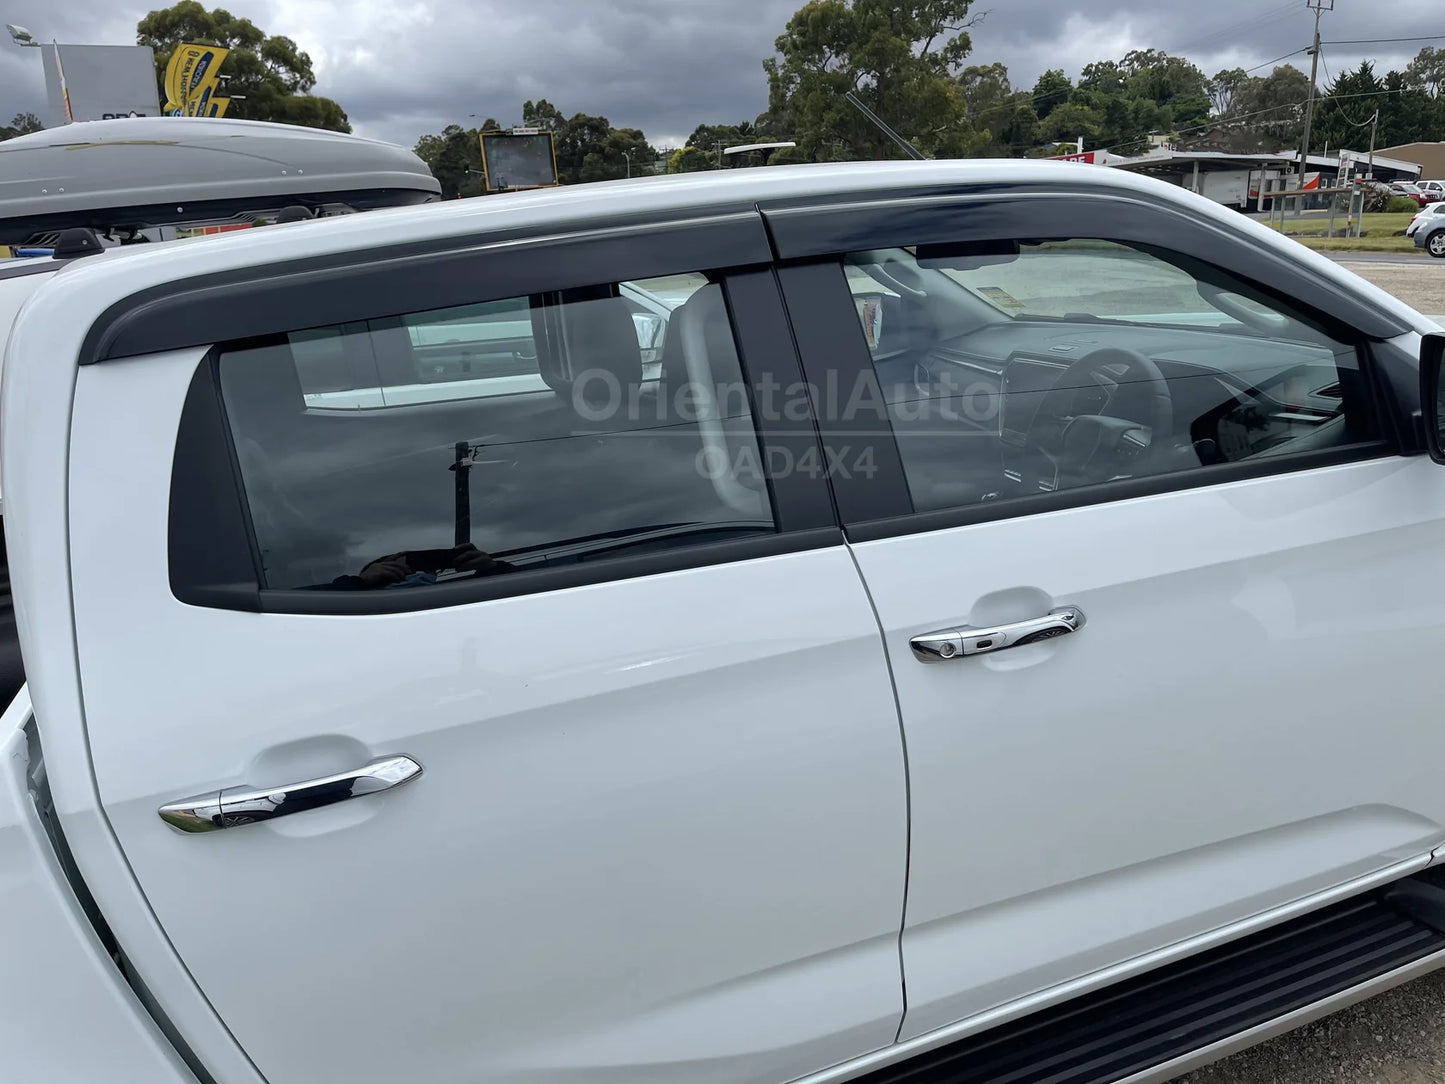 Injection Weather Shields & Stainless Steel Door Sills For Mazda BT-50 BT50 Dual Cab 2020-Onwards Window Visors Weathershields Scuff Plates